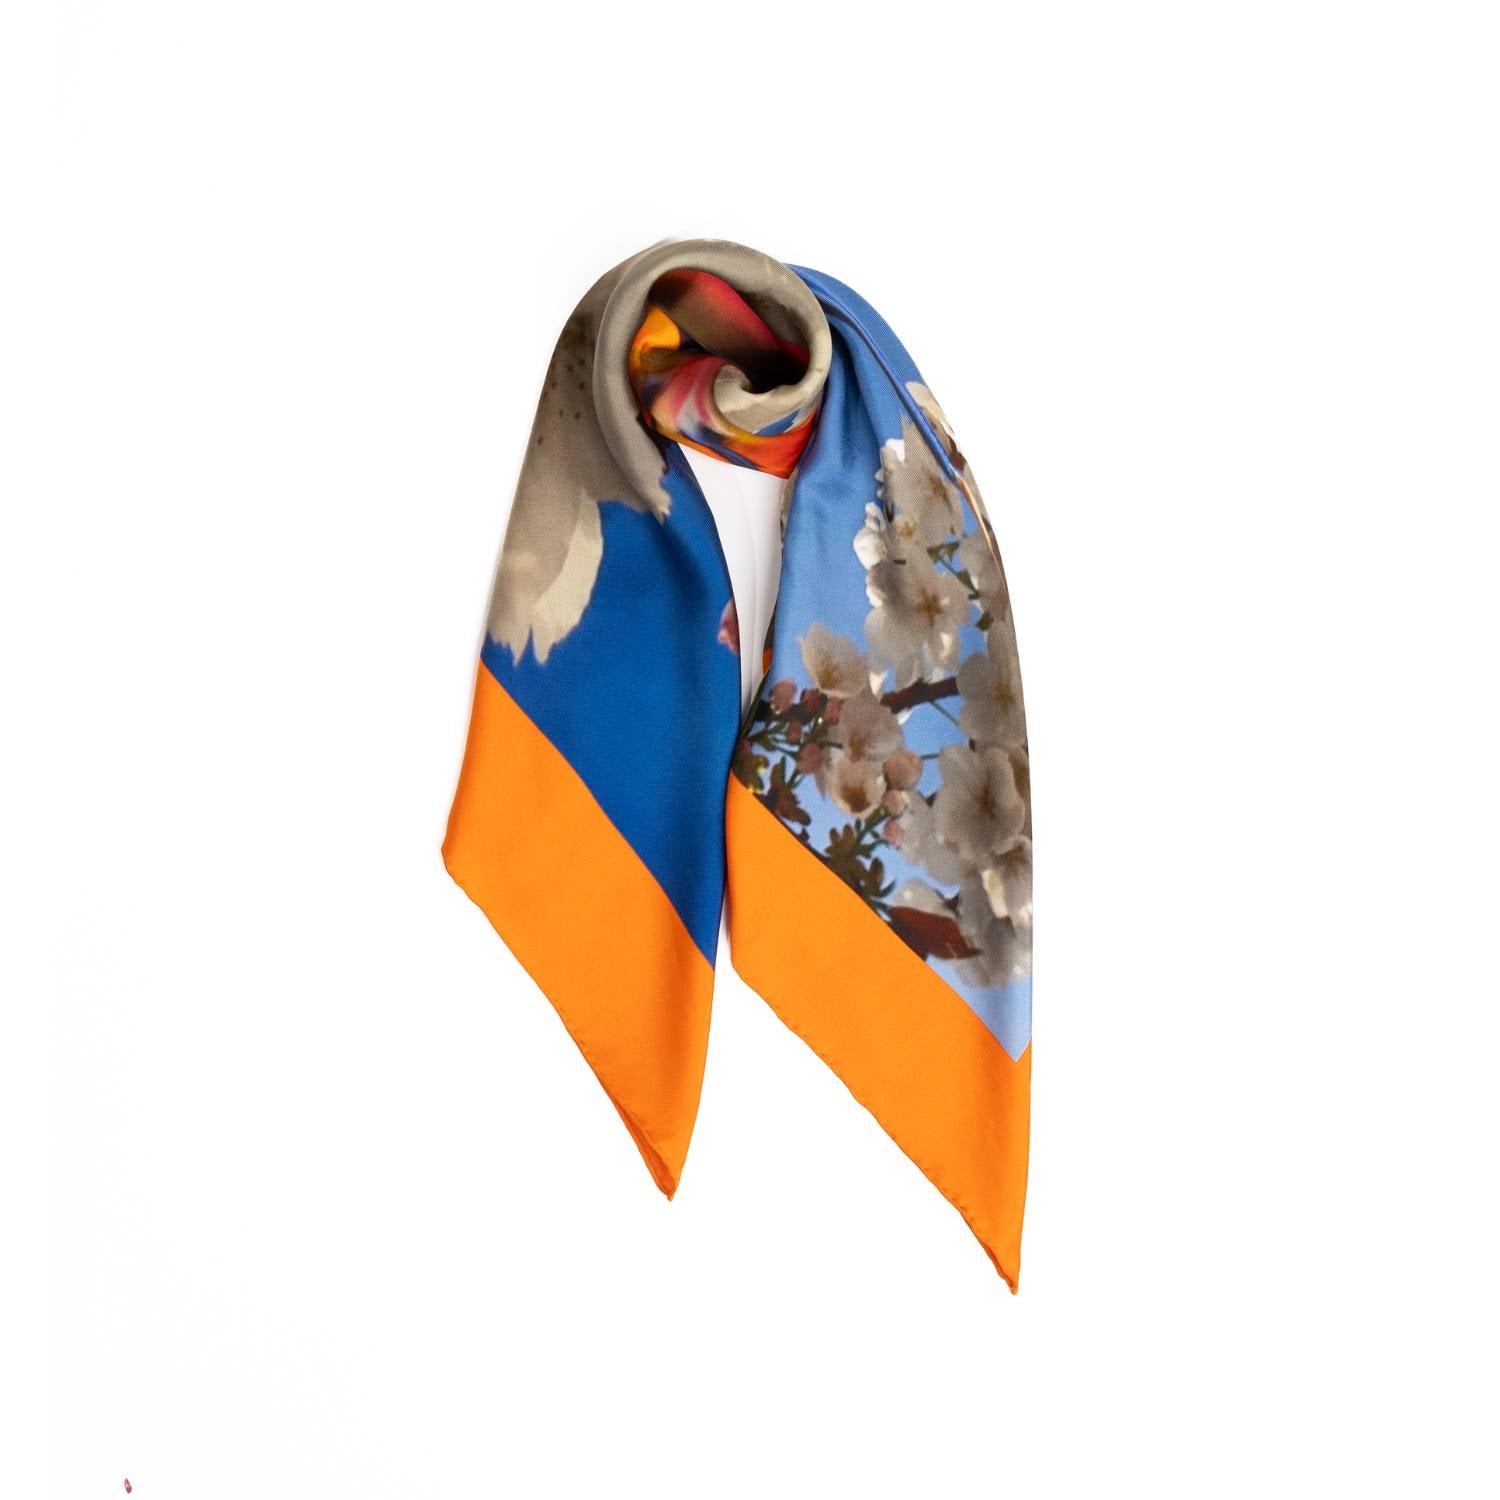 Silk scarf showcasing an Orange Bird of Paradise with White and Blue Cherry Blossom print, displayed as a cutout to highlight its intricate design.